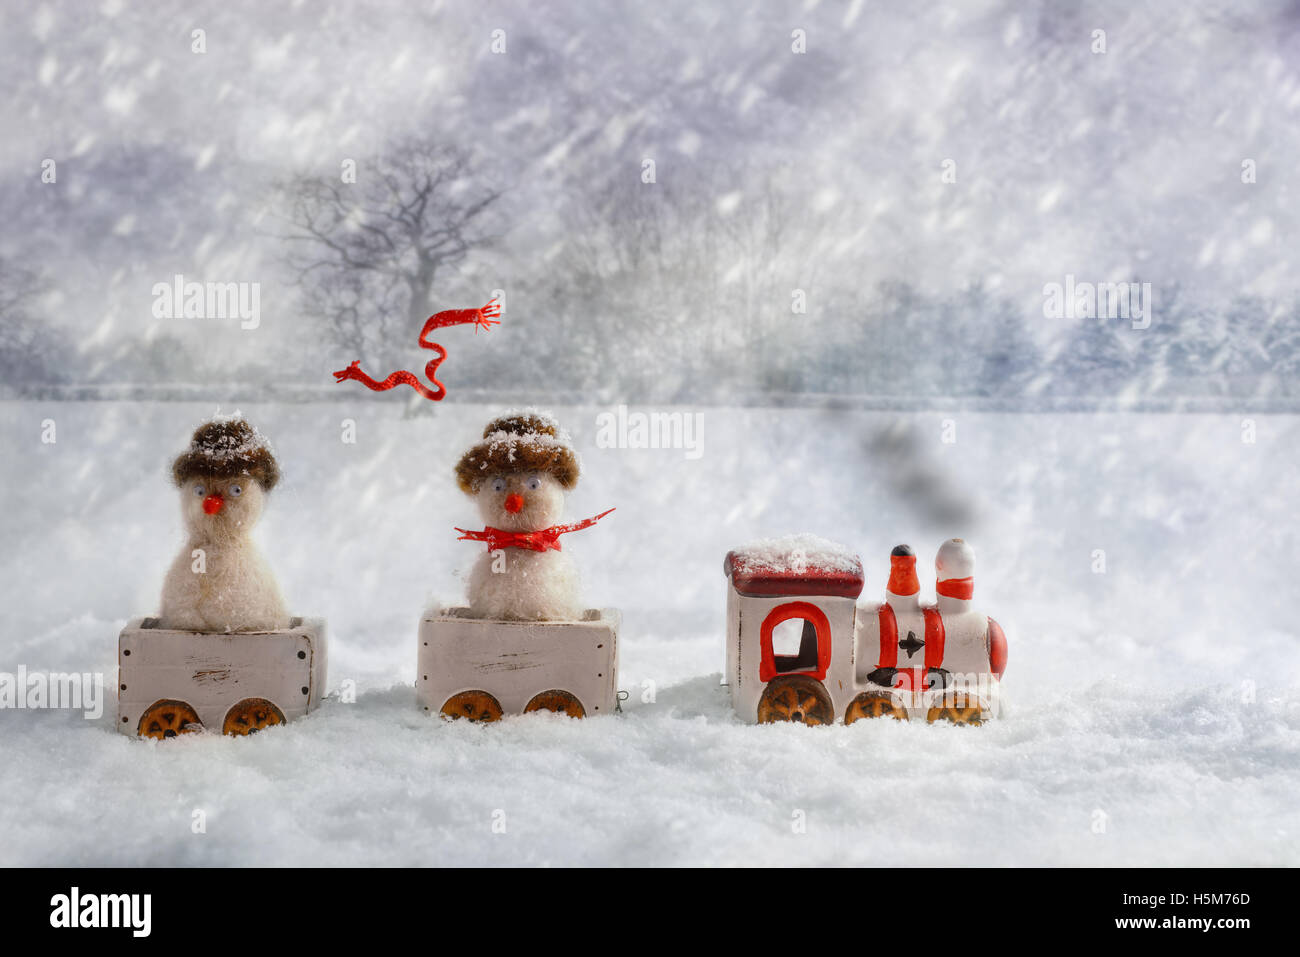 Christmas train set carrying snowmen, one with flying knitted scarf Stock Photo